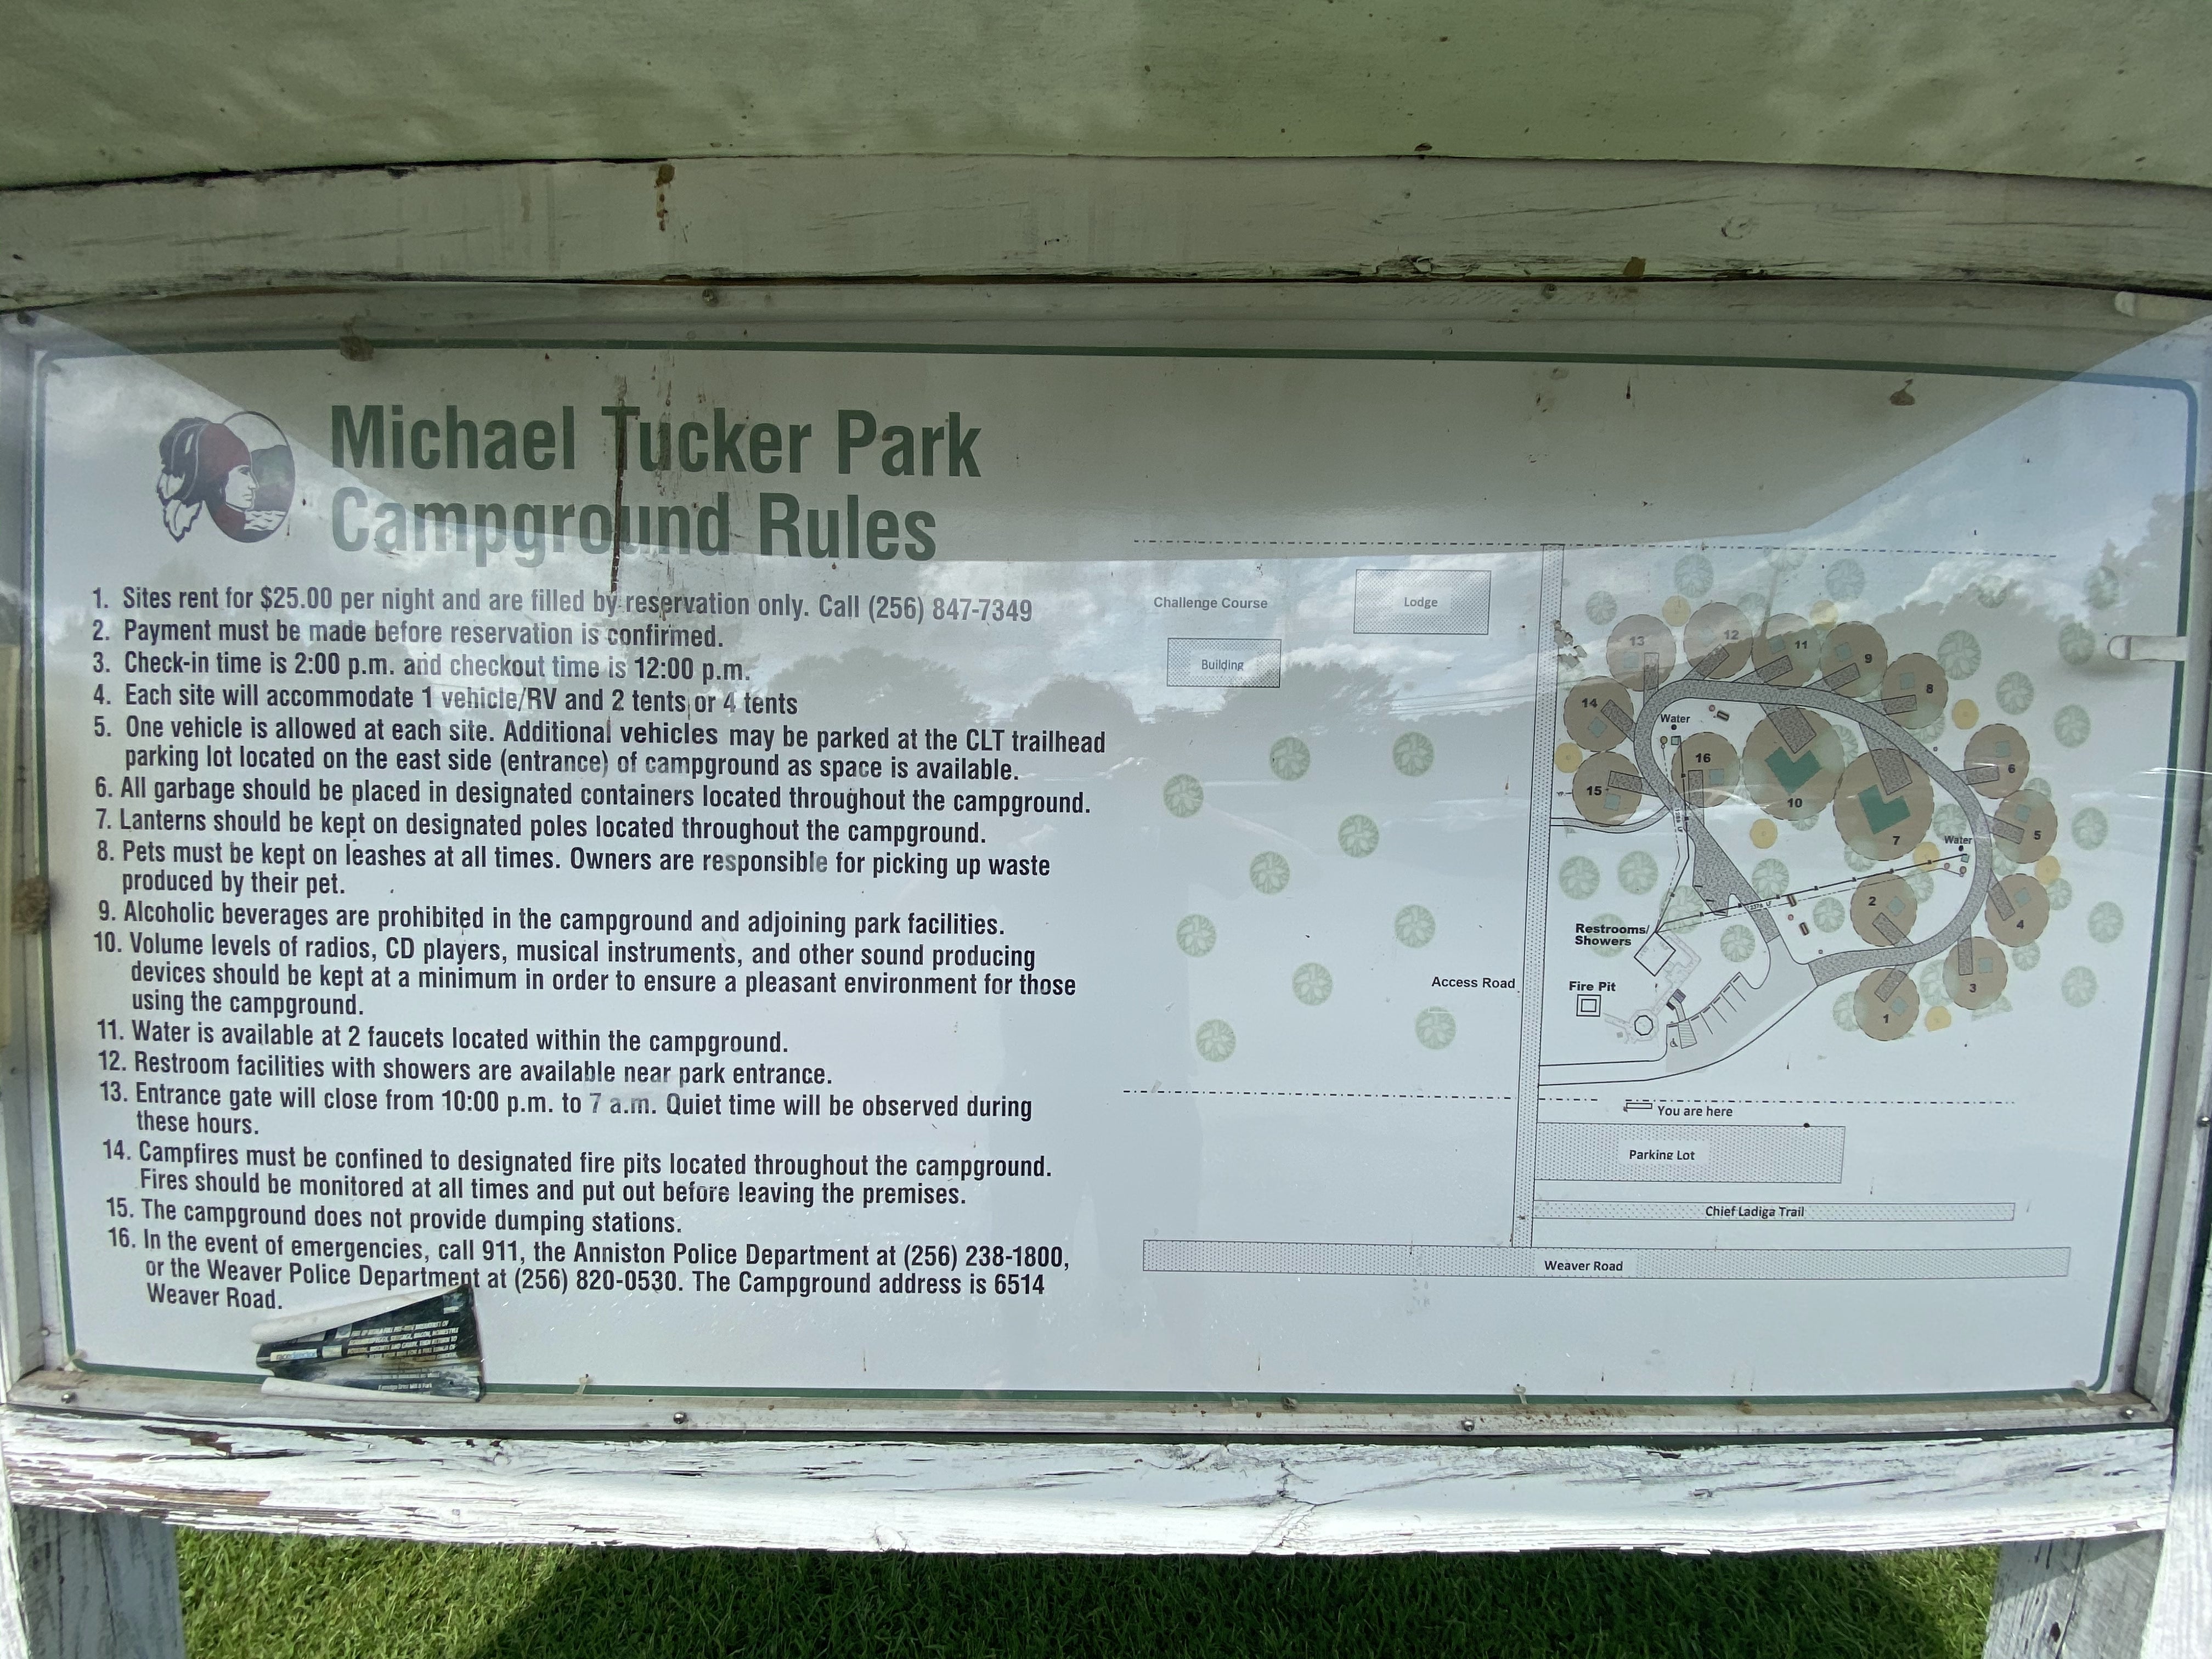 Camper submitted image from Michael Tucker Memorial Park & Chief Ladiga Trail - 5